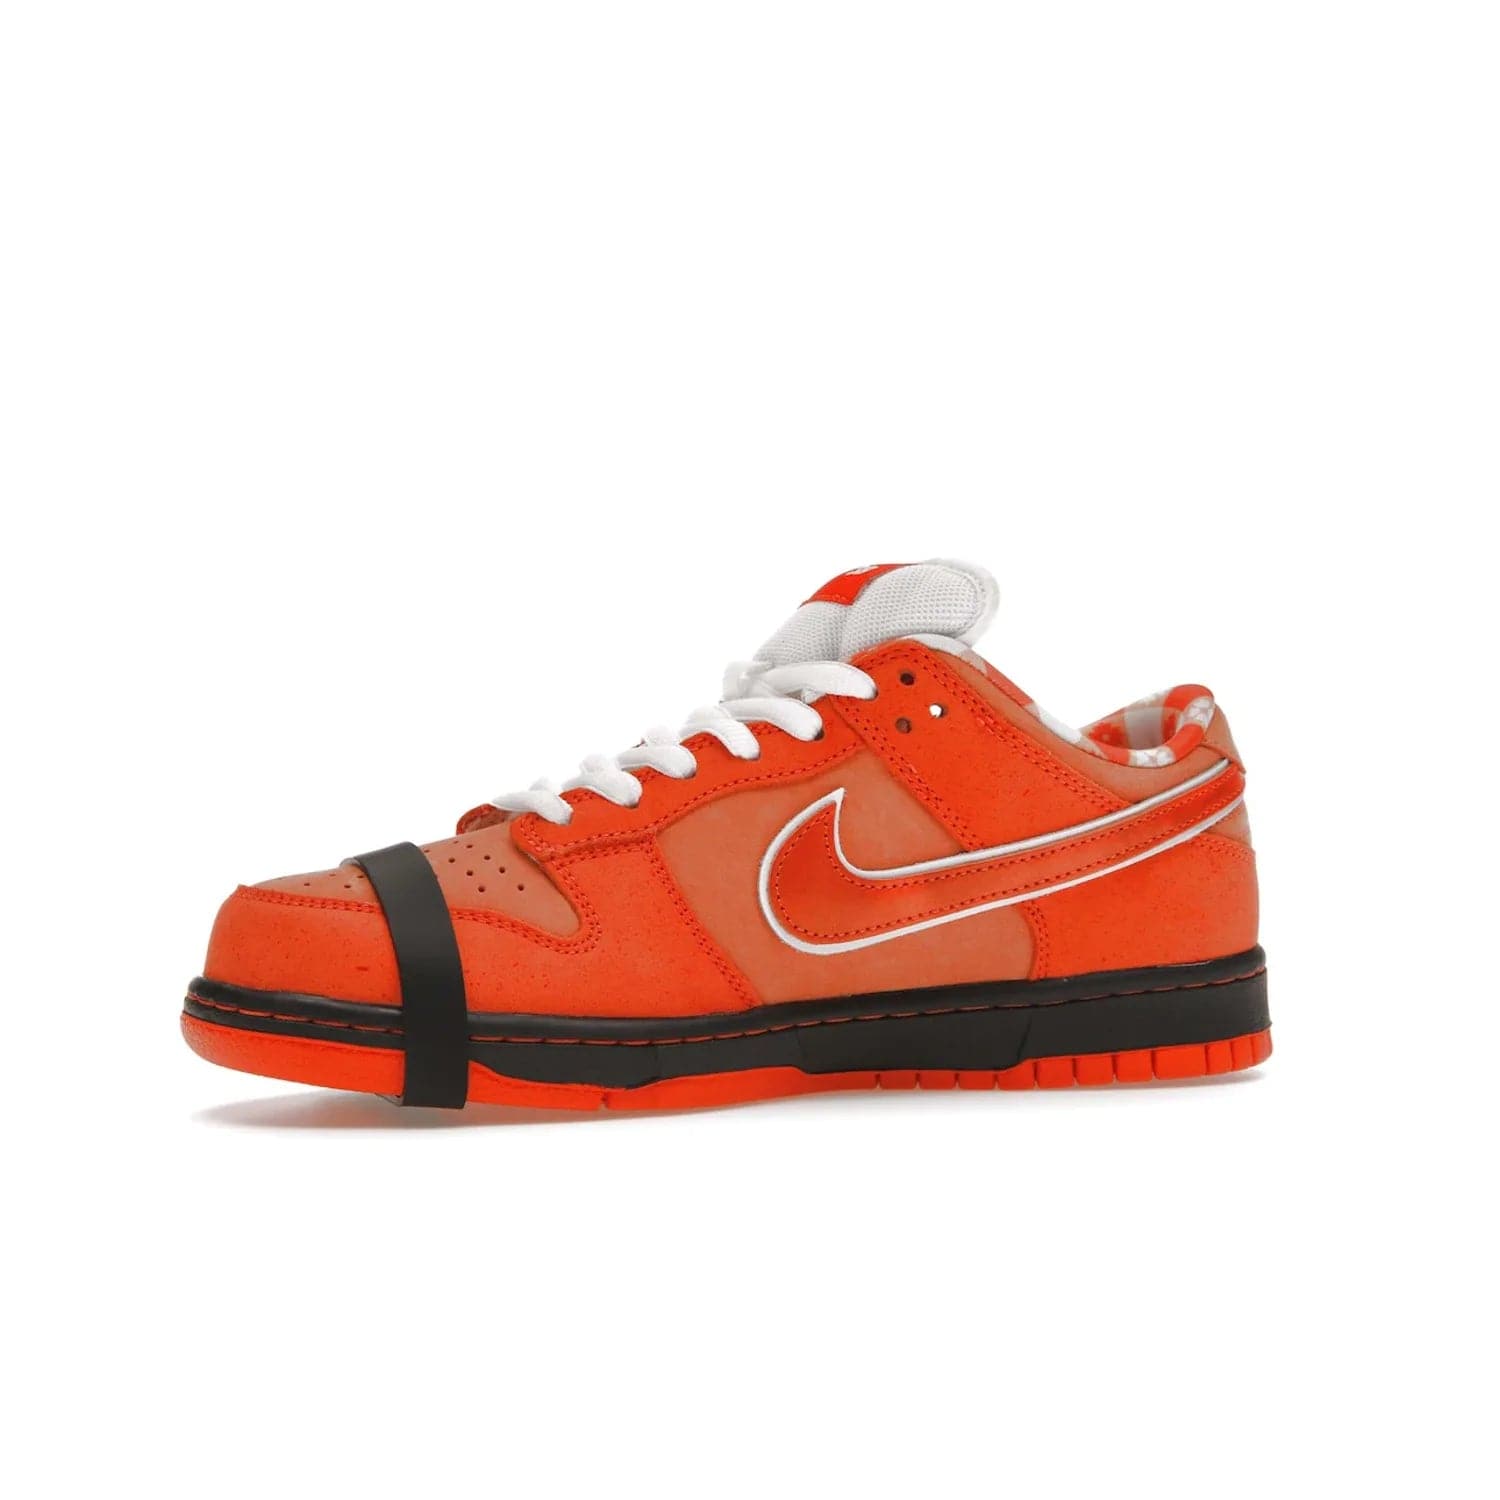 Nike SB Dunk Low Concepts Orange Lobster - Image 17 - Only at www.BallersClubKickz.com - Limited Nike SB Dunk Low Concepts Orange Lobster features premium nubuck upper with vibrant oranges for eye-catching colorblocked design. Signature Nike SB tag and bib-inspired interior for added texture. Outsole and cupsole provide extra reinforcement. Get it 12/20/2022.